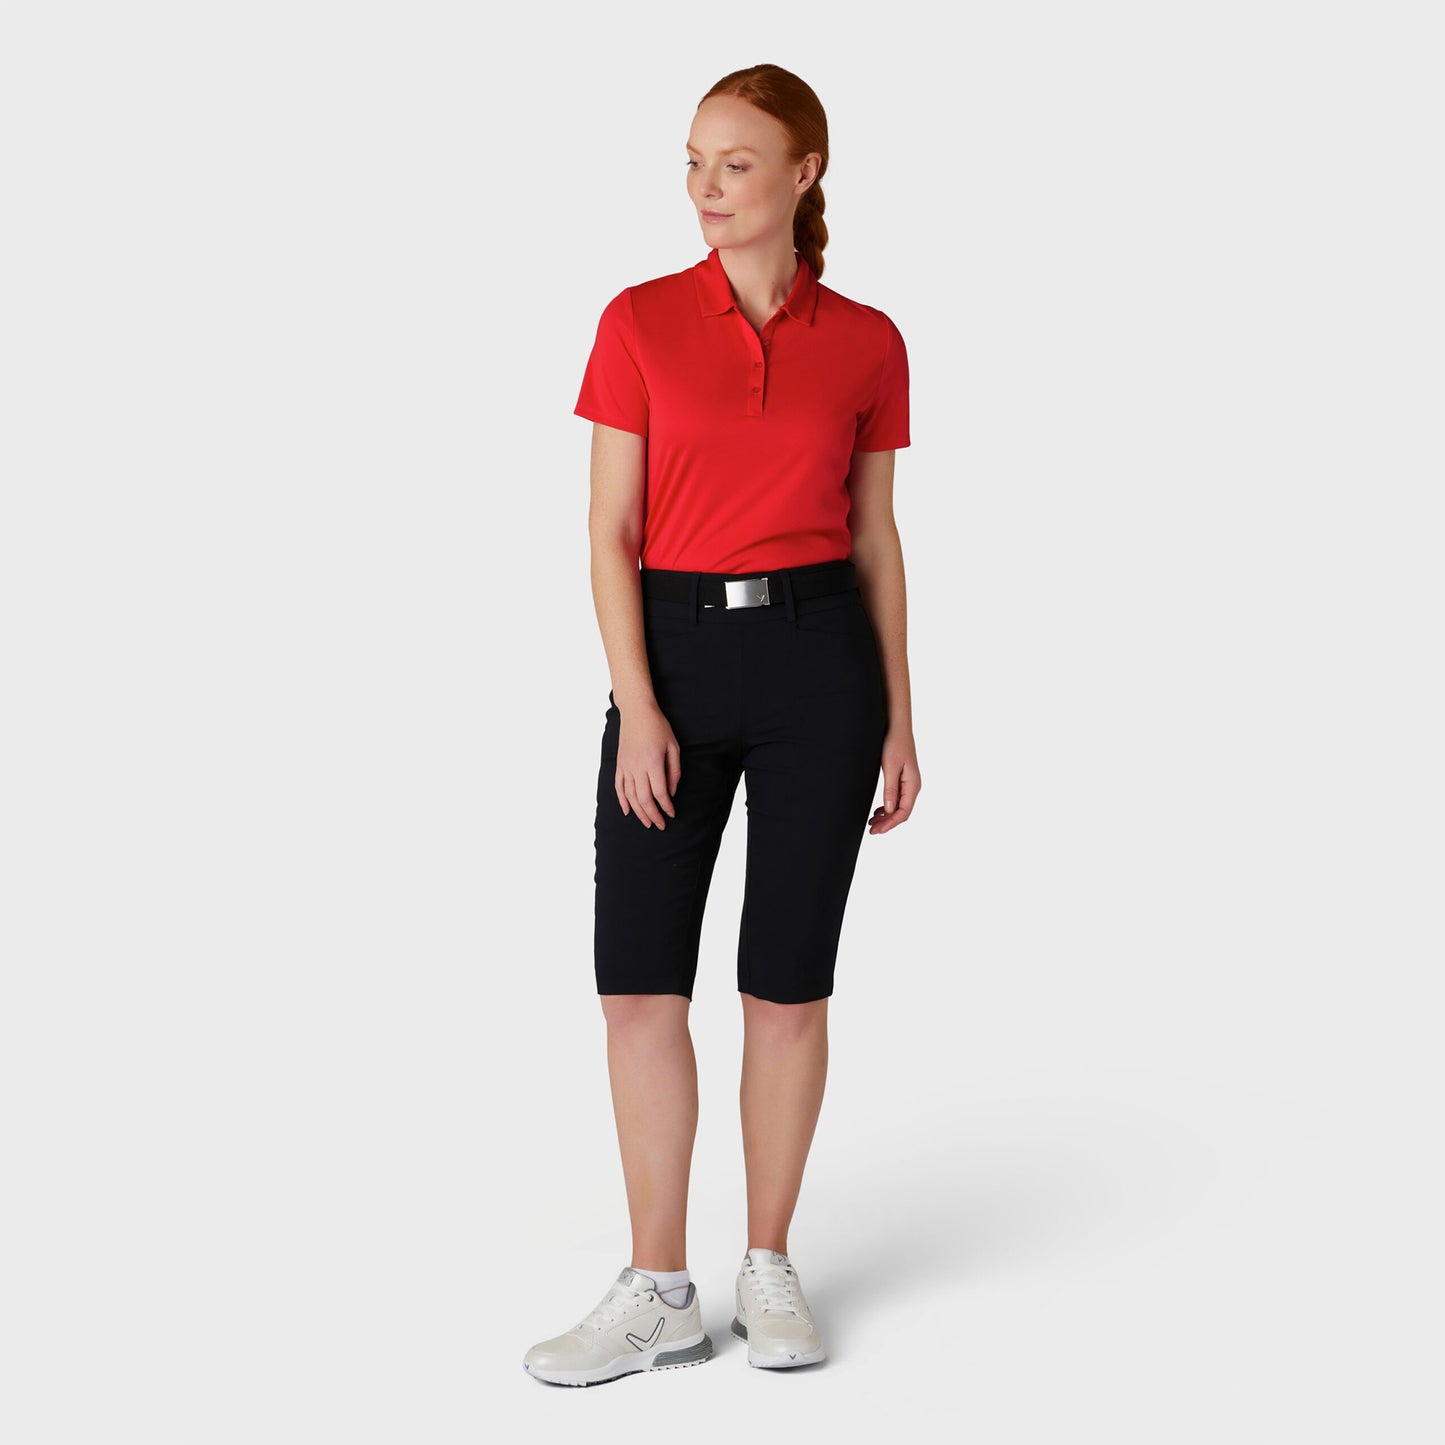 Callaway Ladies True Red Short Sleeve Polo with UV Block Protection